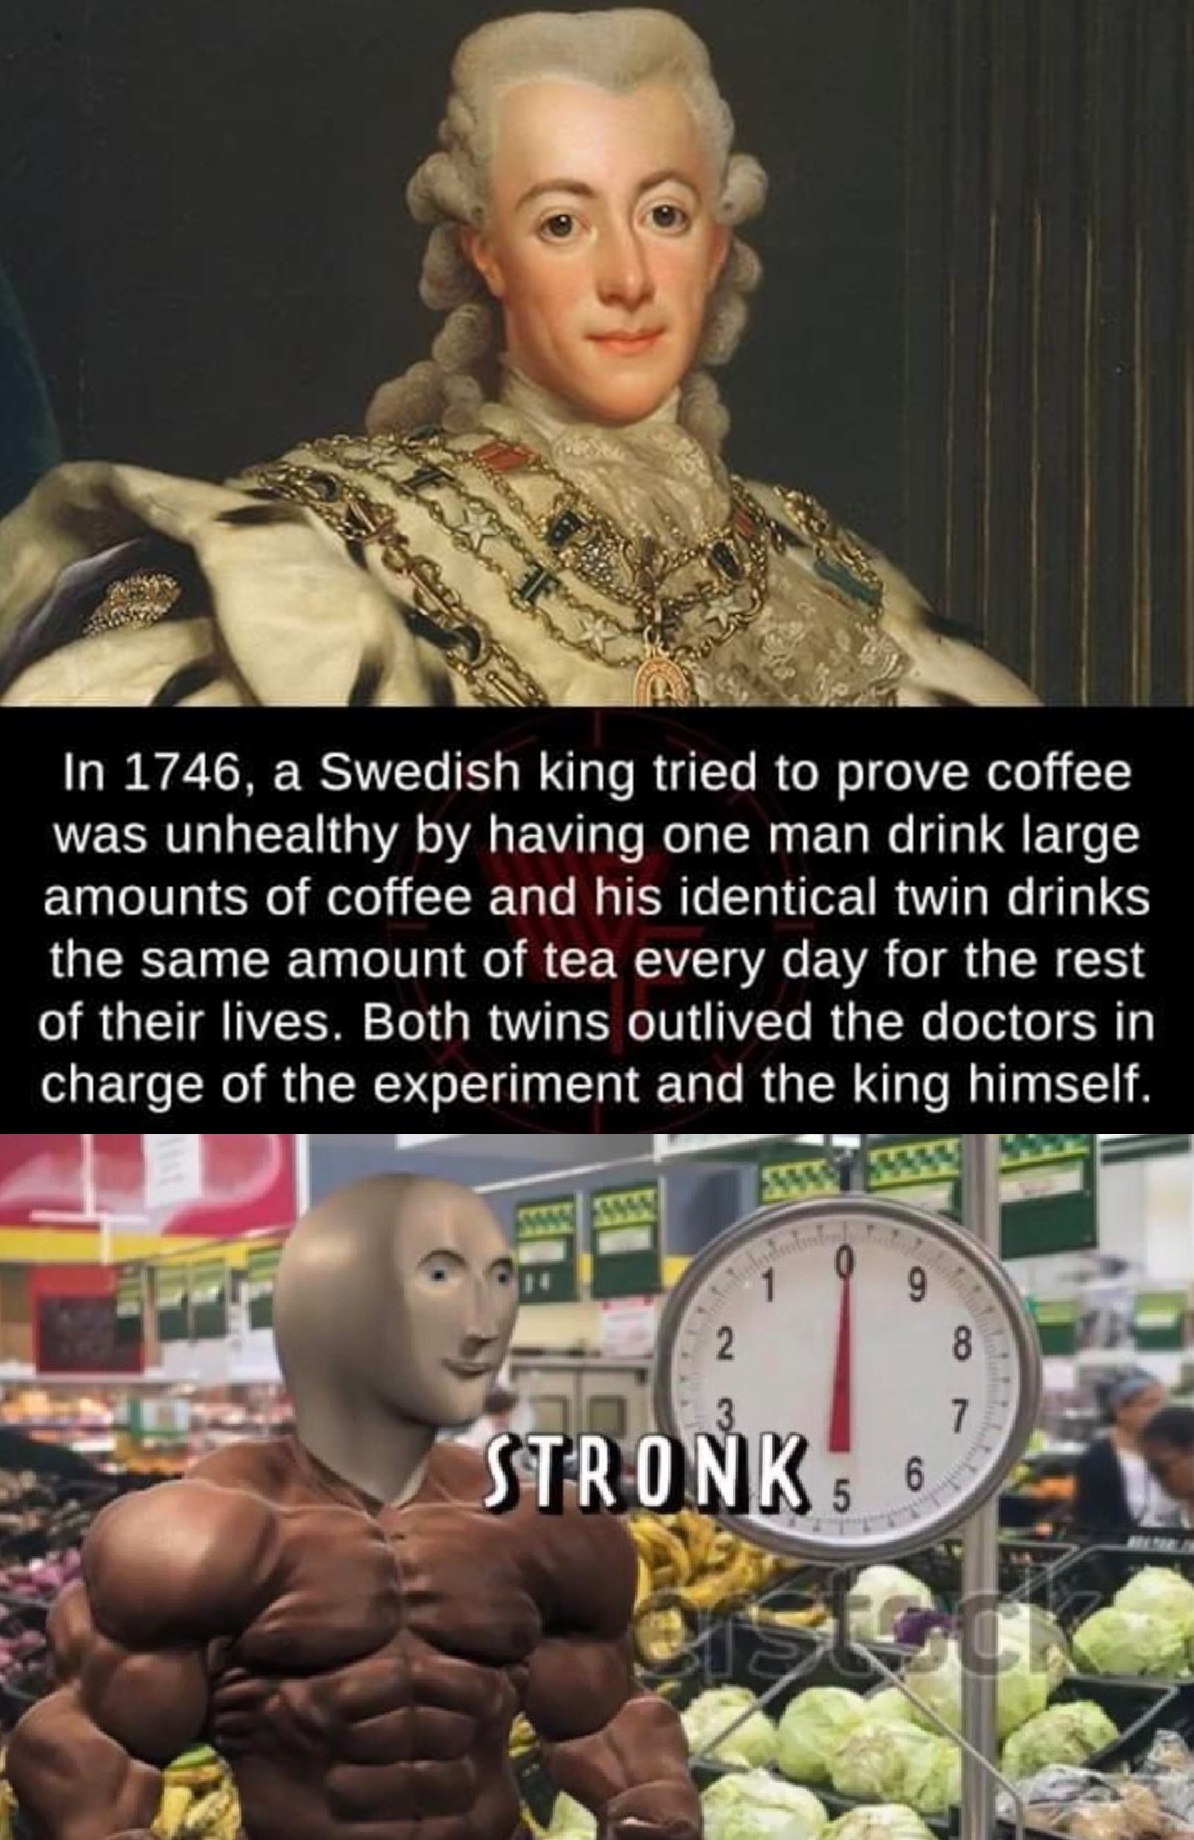 In 1746, a Swedish king tried to prove coffee was unhealthy by having one man drink large amounts of coffee and his identical twin drinks the same amount of tea every day for the rest of their lives. Both twins outlived the doctors in charge of the…